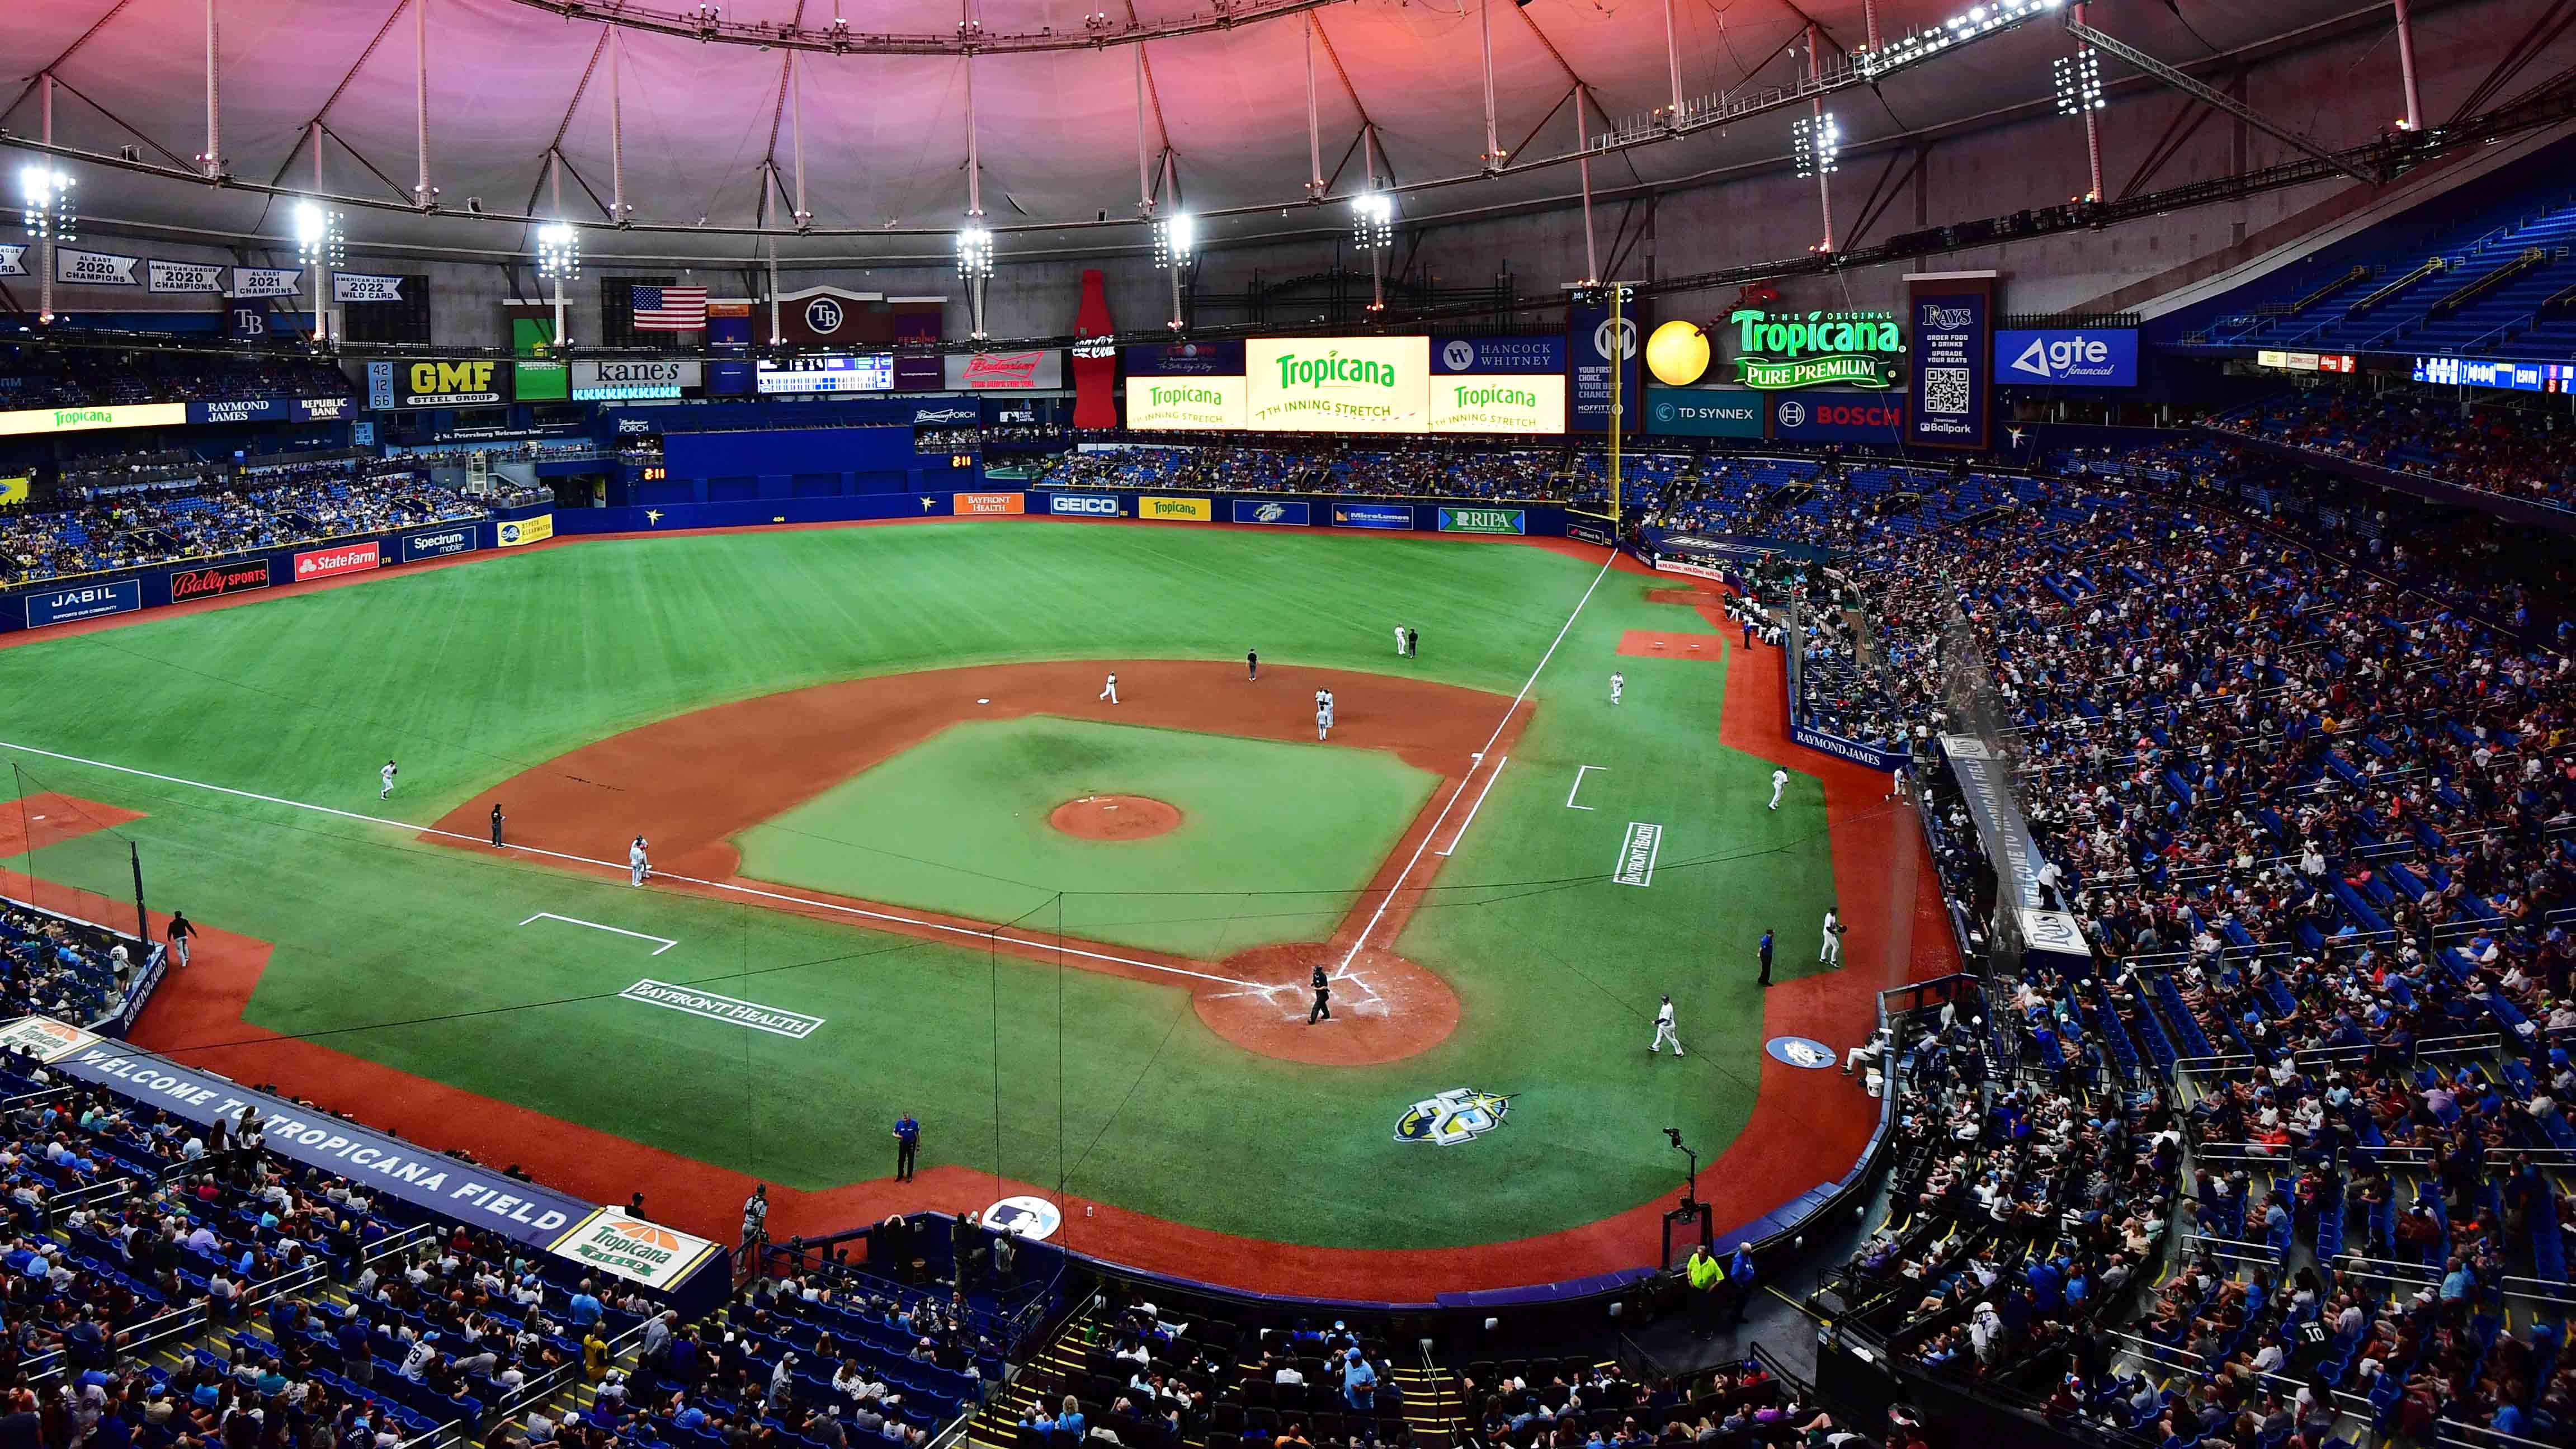 Rays announce deal for new ballpark in St. Petersburg – NBC 5